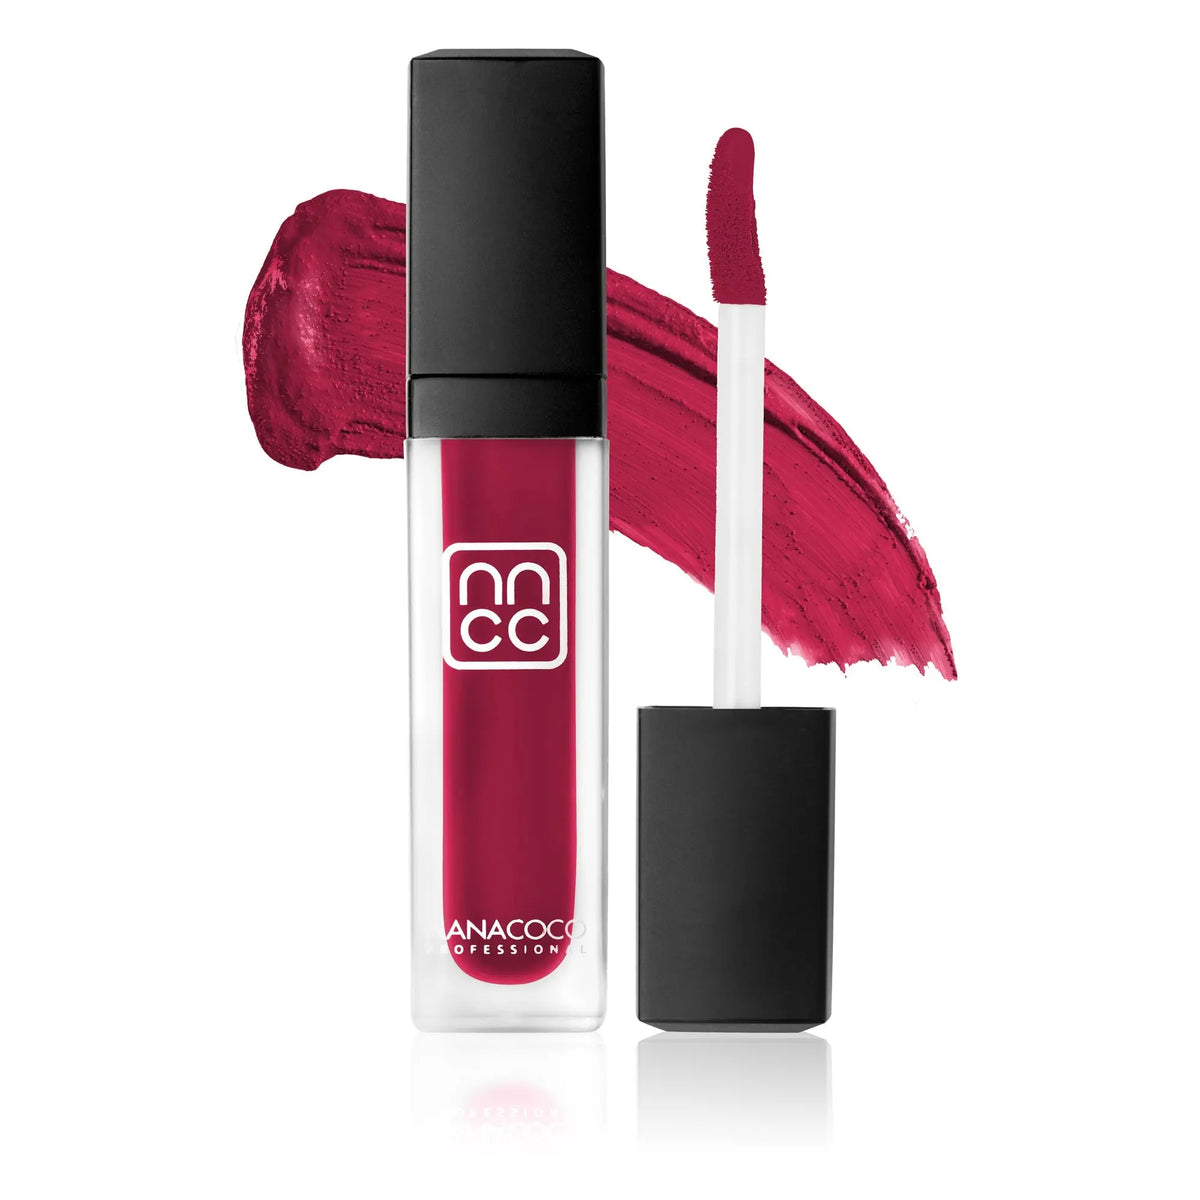 NANACOCO PRO Lipfinity Long Lasting Matte Lipcreme 6.2ml (One and Only) % | product_vendor%